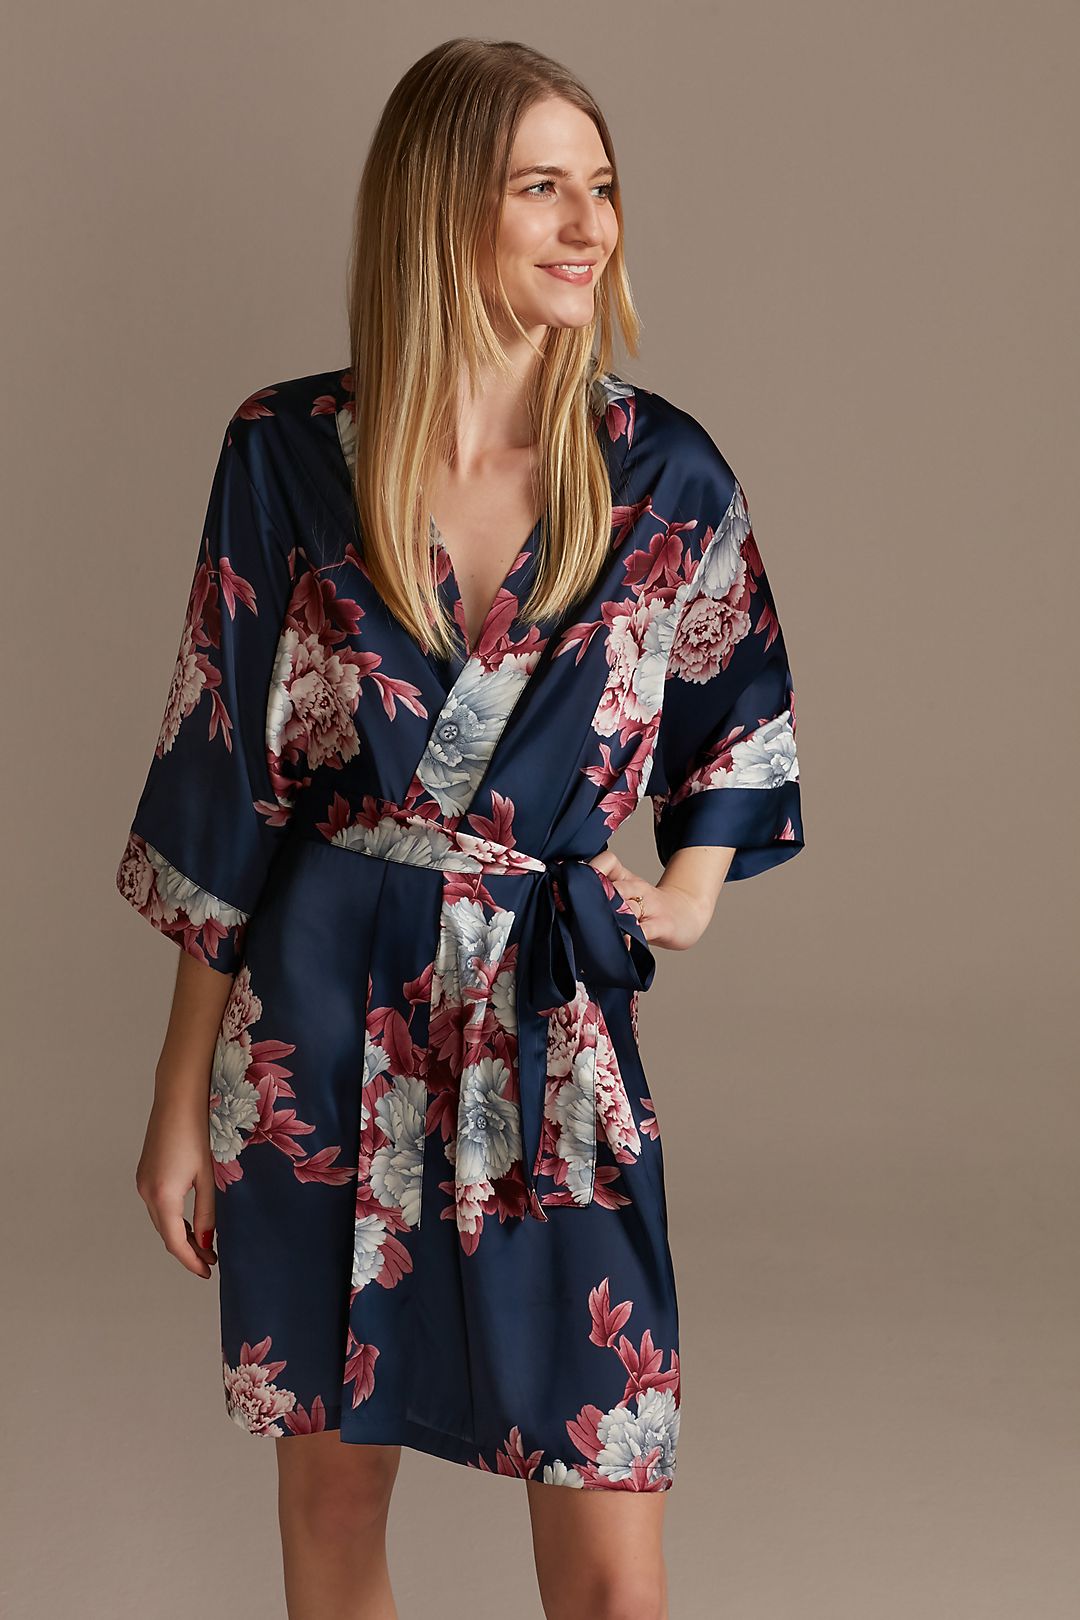 Marine and Wine Floral Satin Robe Image 1